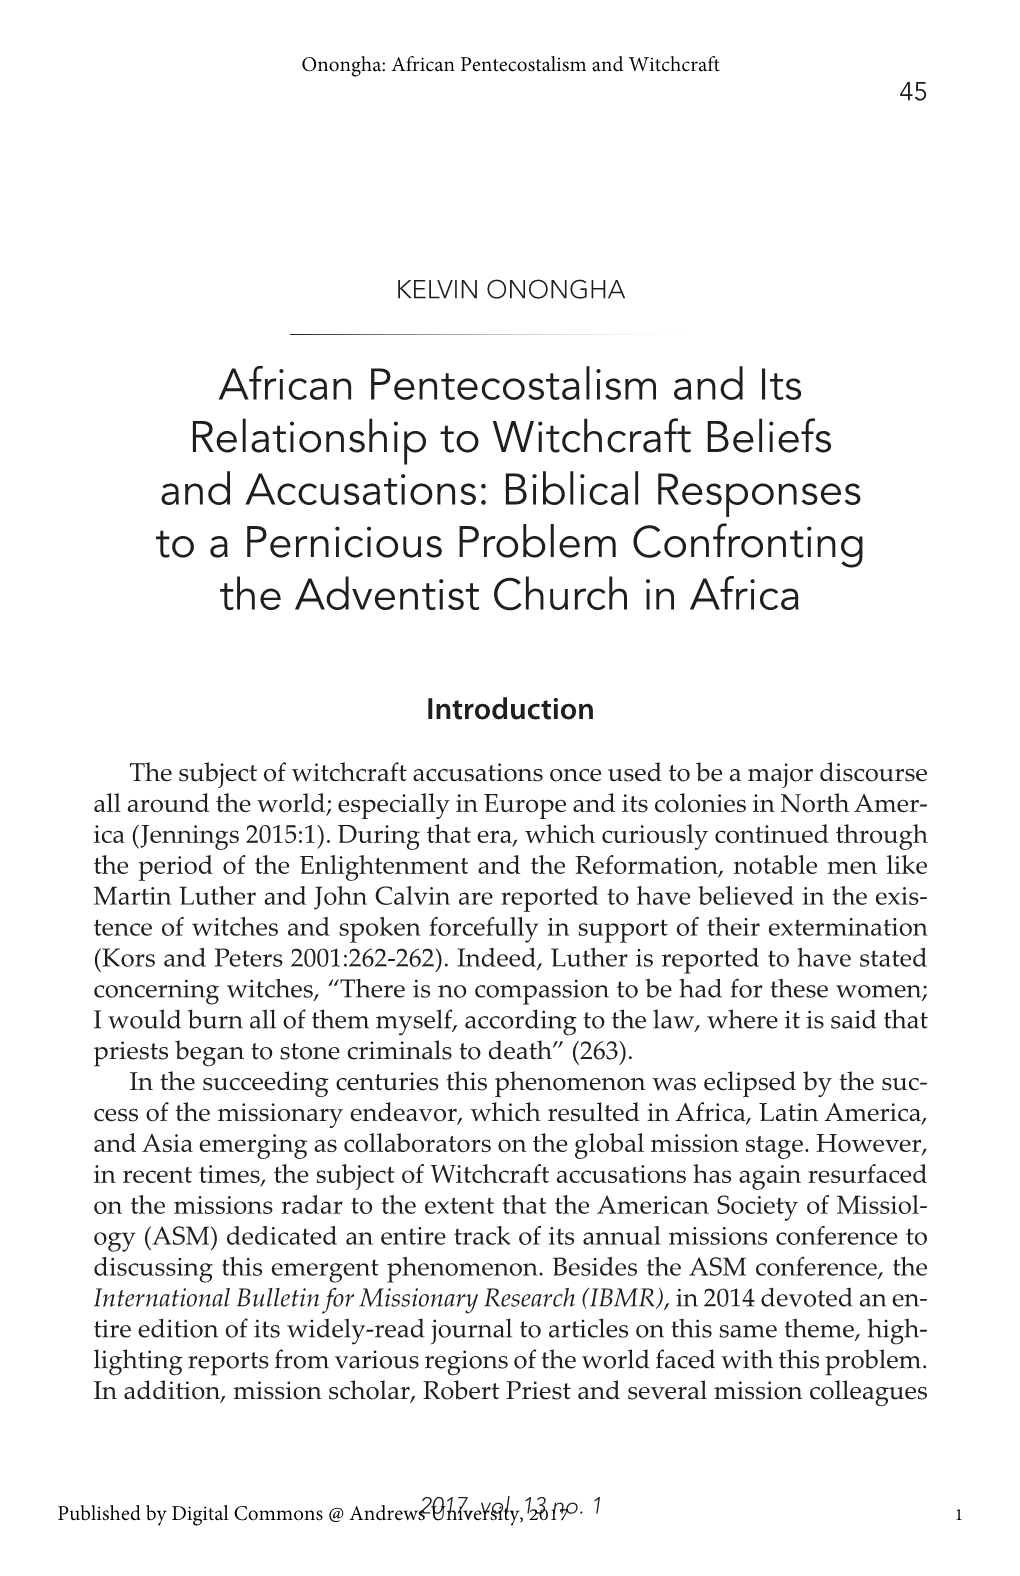 African Pentecostalism and Its Relationship to Witchcraft Beliefs